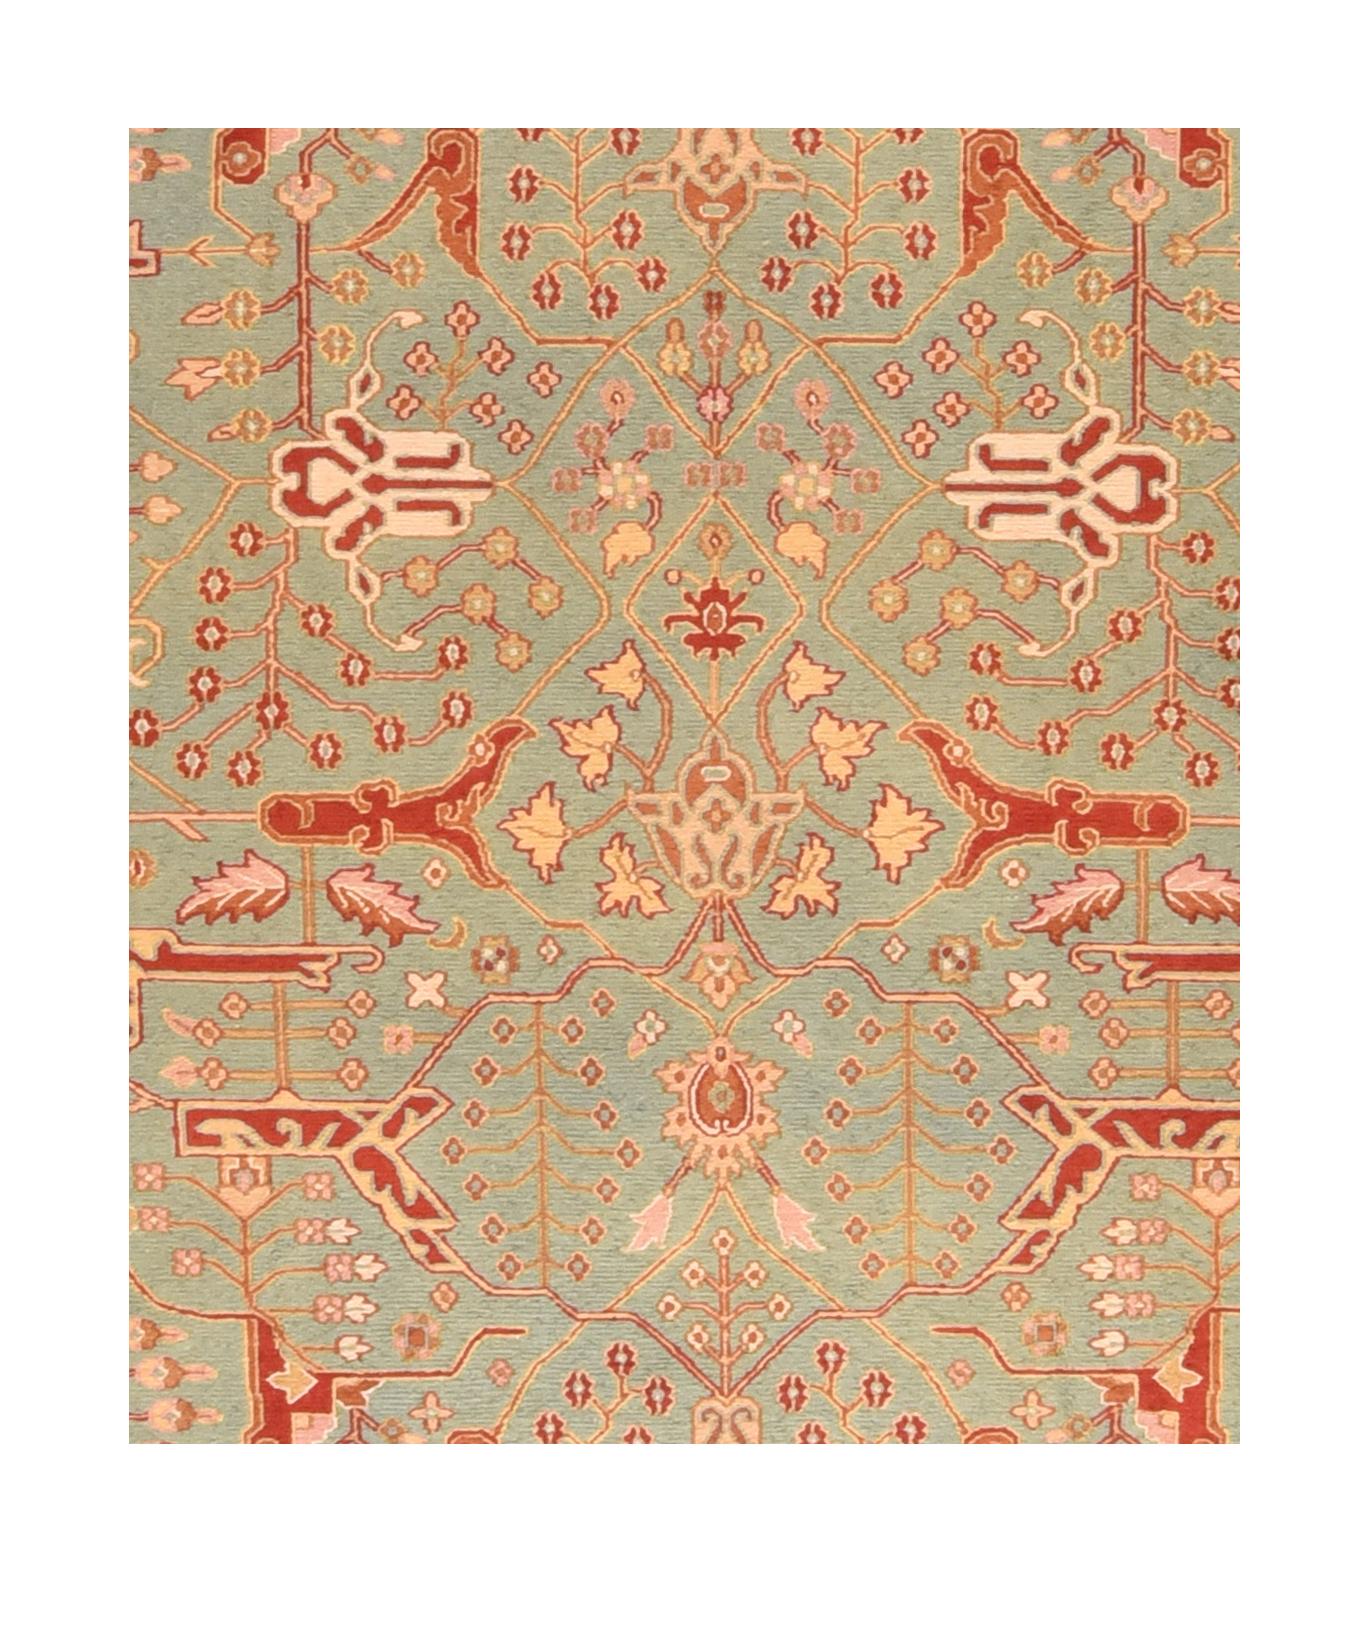 Sumak Area Rug, flat-weave hand knotted, circa 1970s

Design: Floral

Soumak (also spelled Soumakh, Sumak, Sumac, or Soumac) is a tapestry technique of weaving strong and decorative textiles used as rugs and domestic bags. Baks used for bedding are